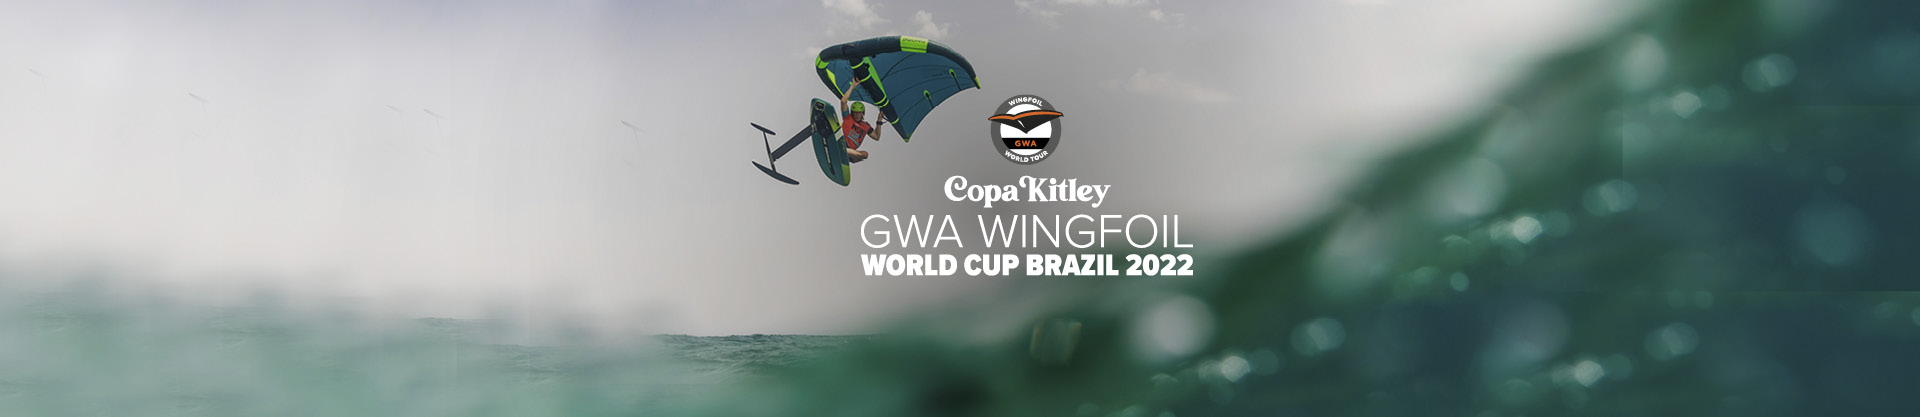 Image for GWA Wingfoil World Cup Brazil 2022